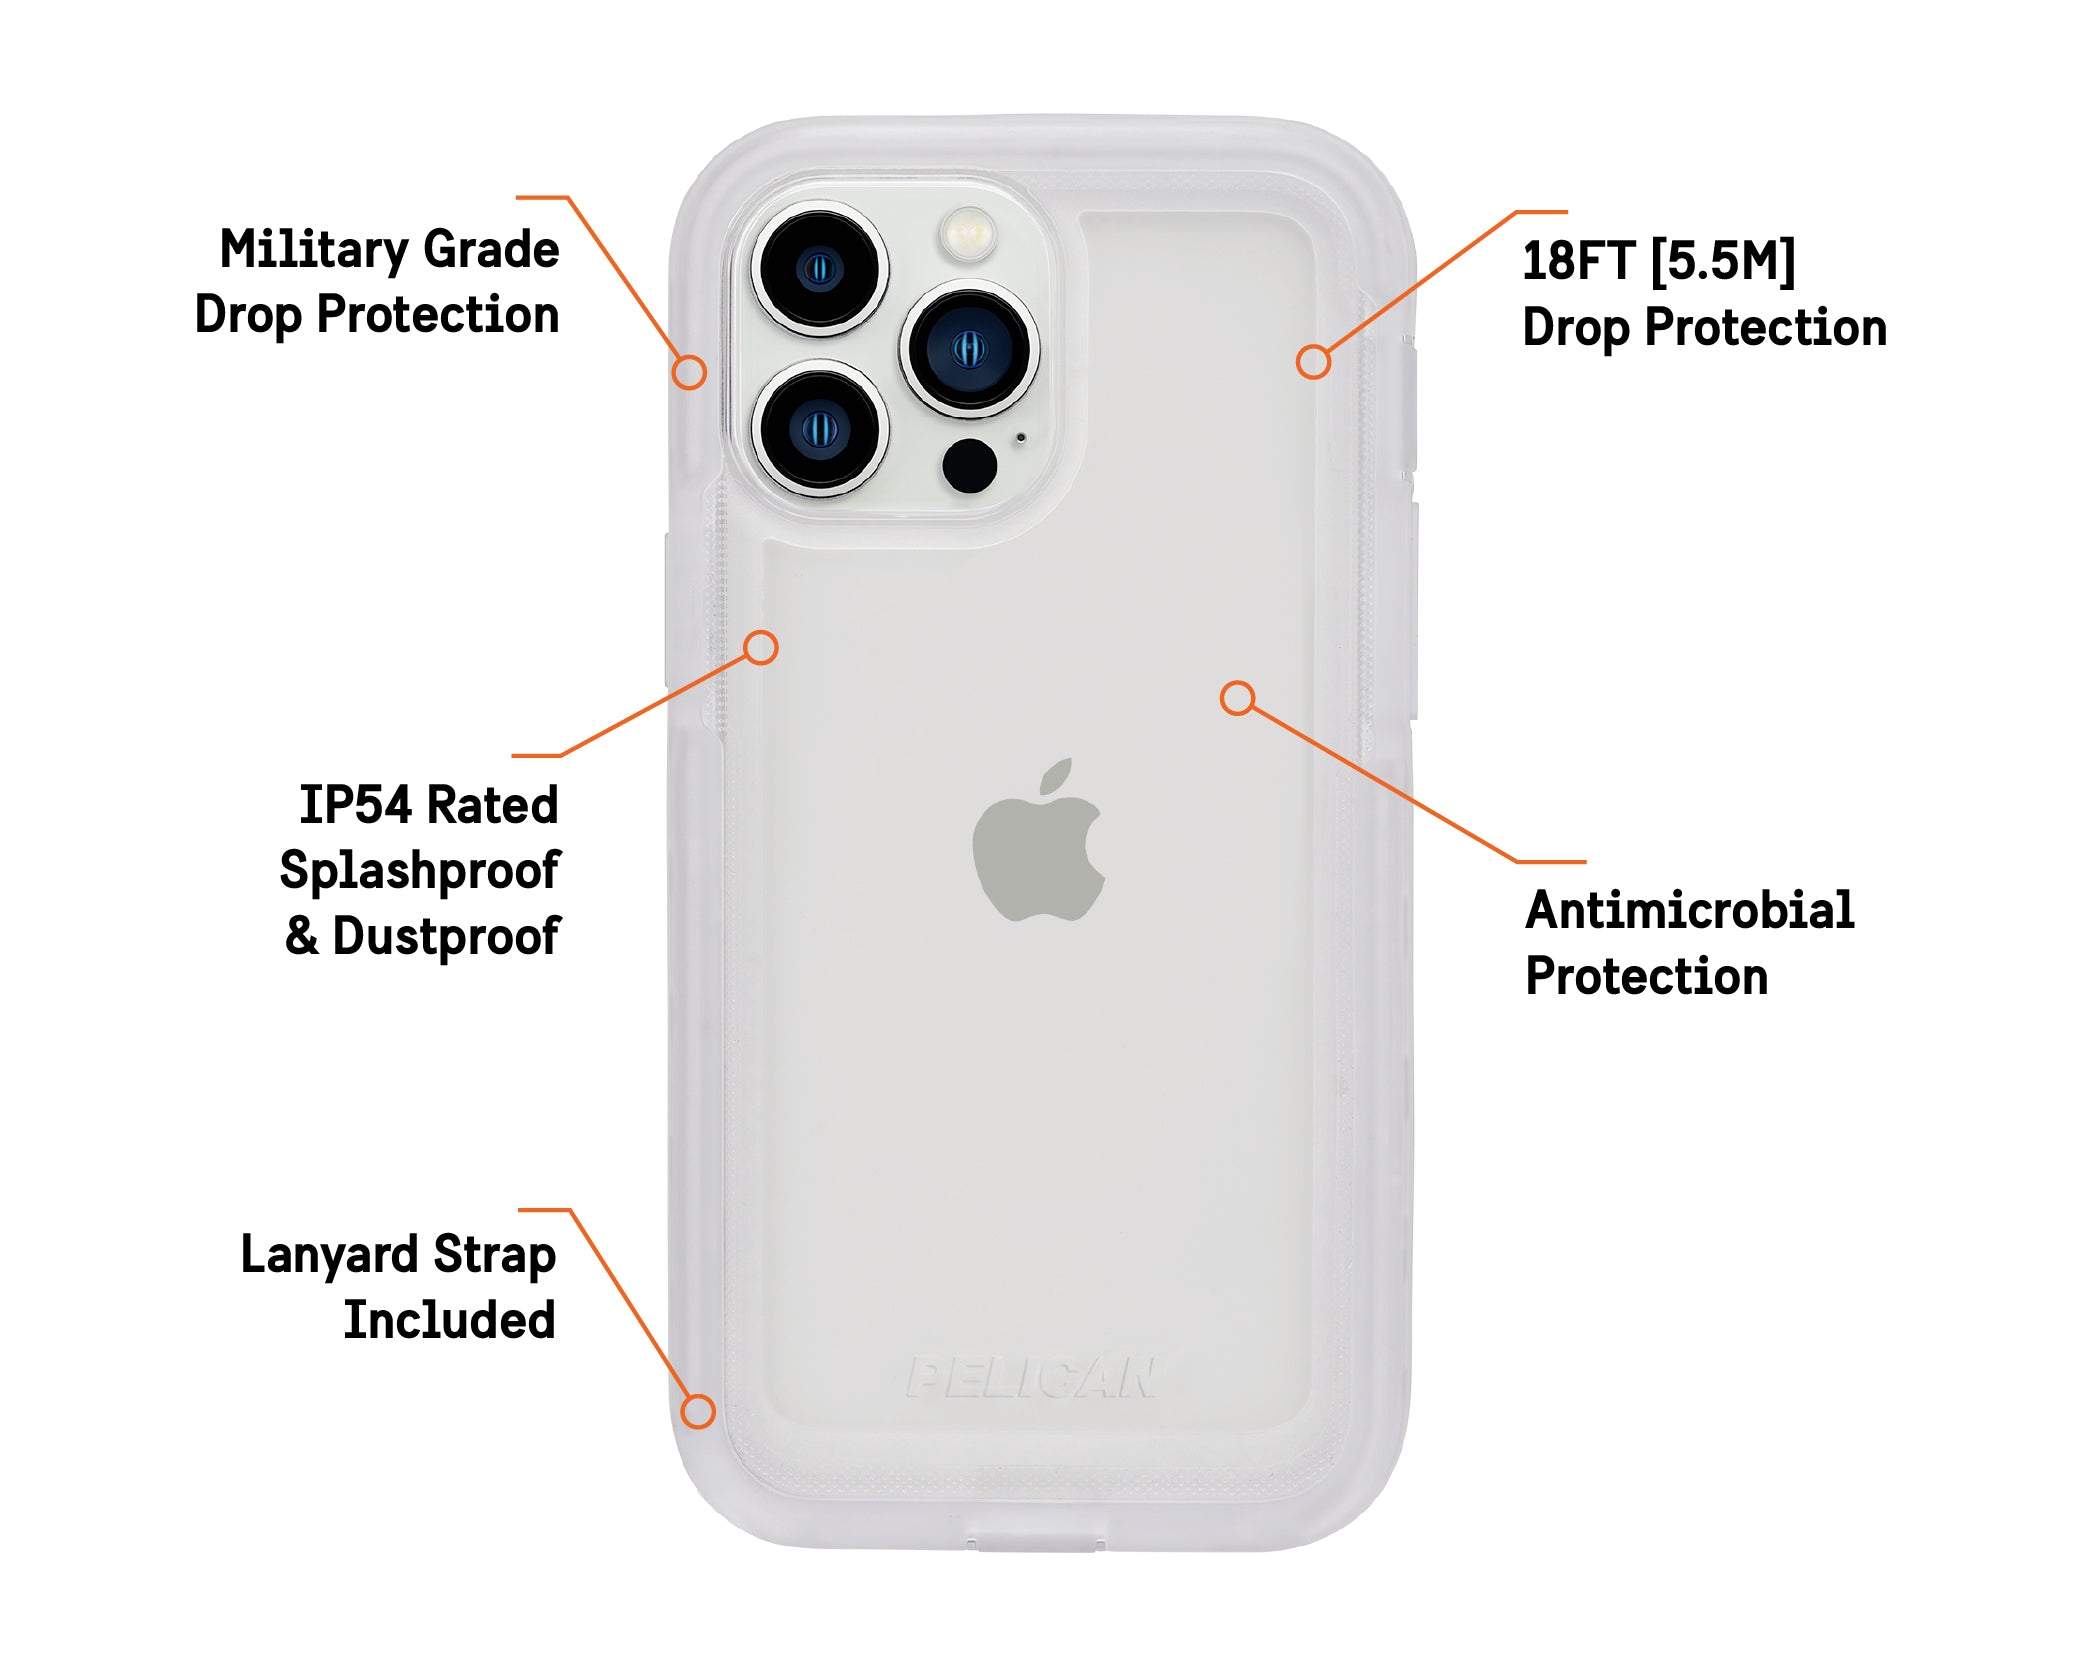 Take FRĒ, the WaterProof case for iPhone 13 Pro Max, on every